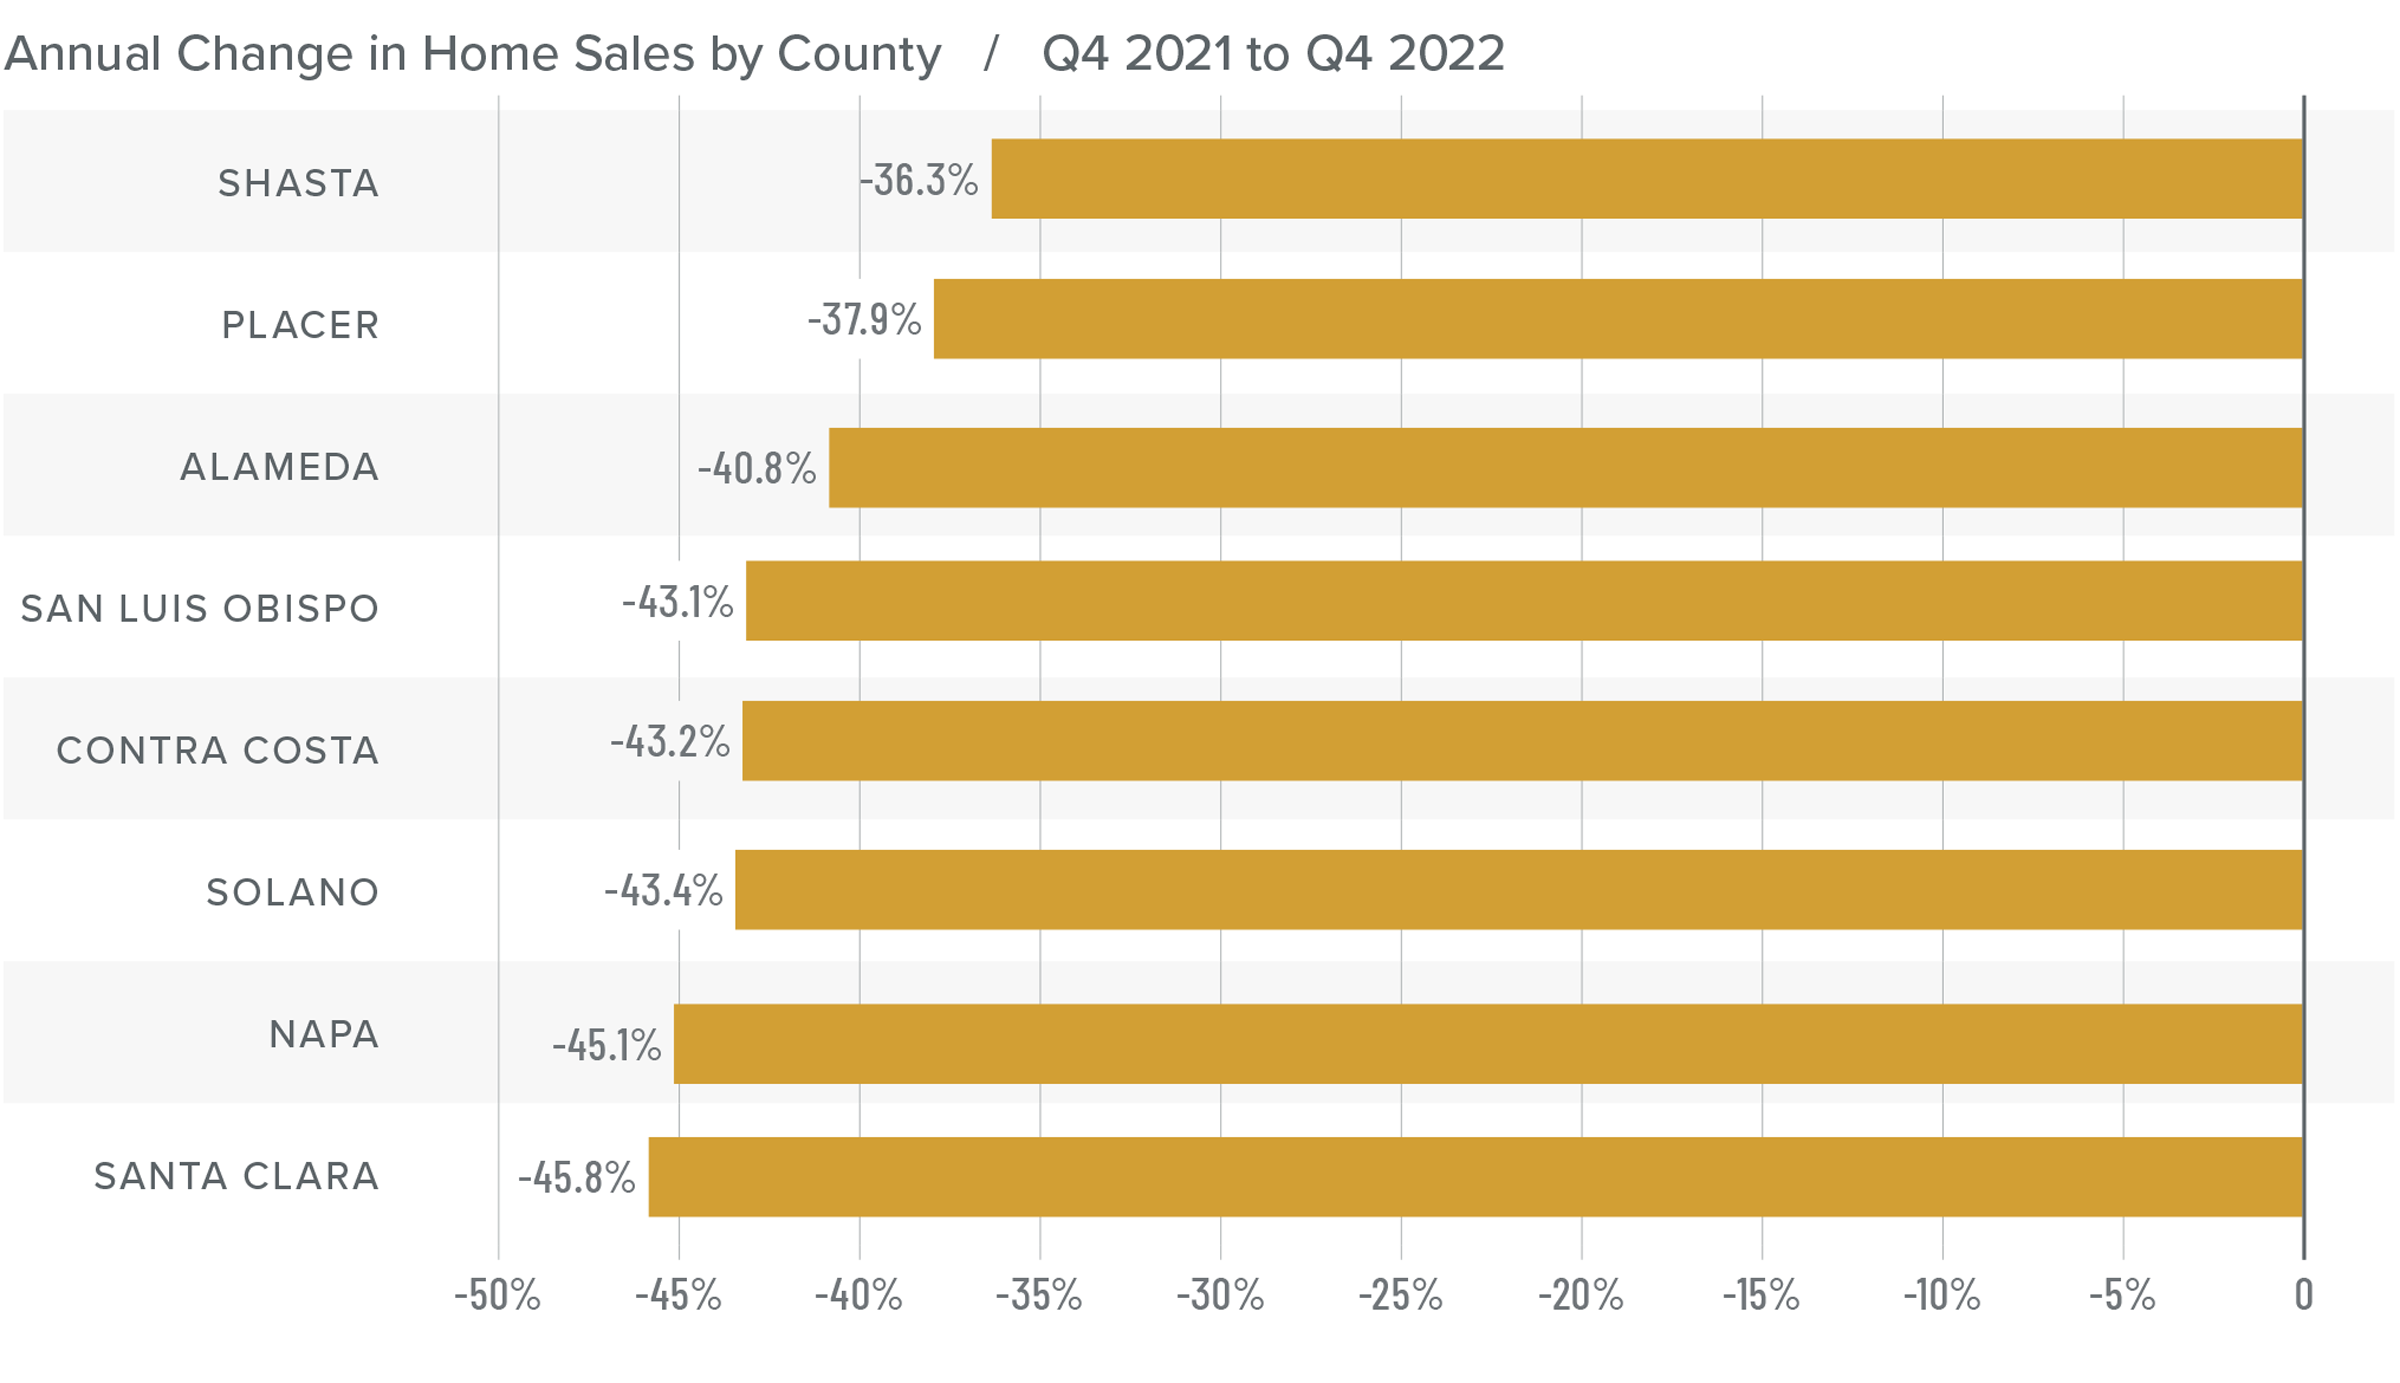 A bar graph showing the annual change in home sales for various counties in Northern California from Q4 2021 to Q4 2022. All counties have a negative percentage year-over-year change. Here are the totals: Shasta at -36.3%, Placer at -37.9%, Alameda at -40.8%, San Luis Obispo at -43.1%, Contra Costa at -43.2%, Solano at -43.4%, Napa at -45.1%, and Santa Clara at -45.8%.